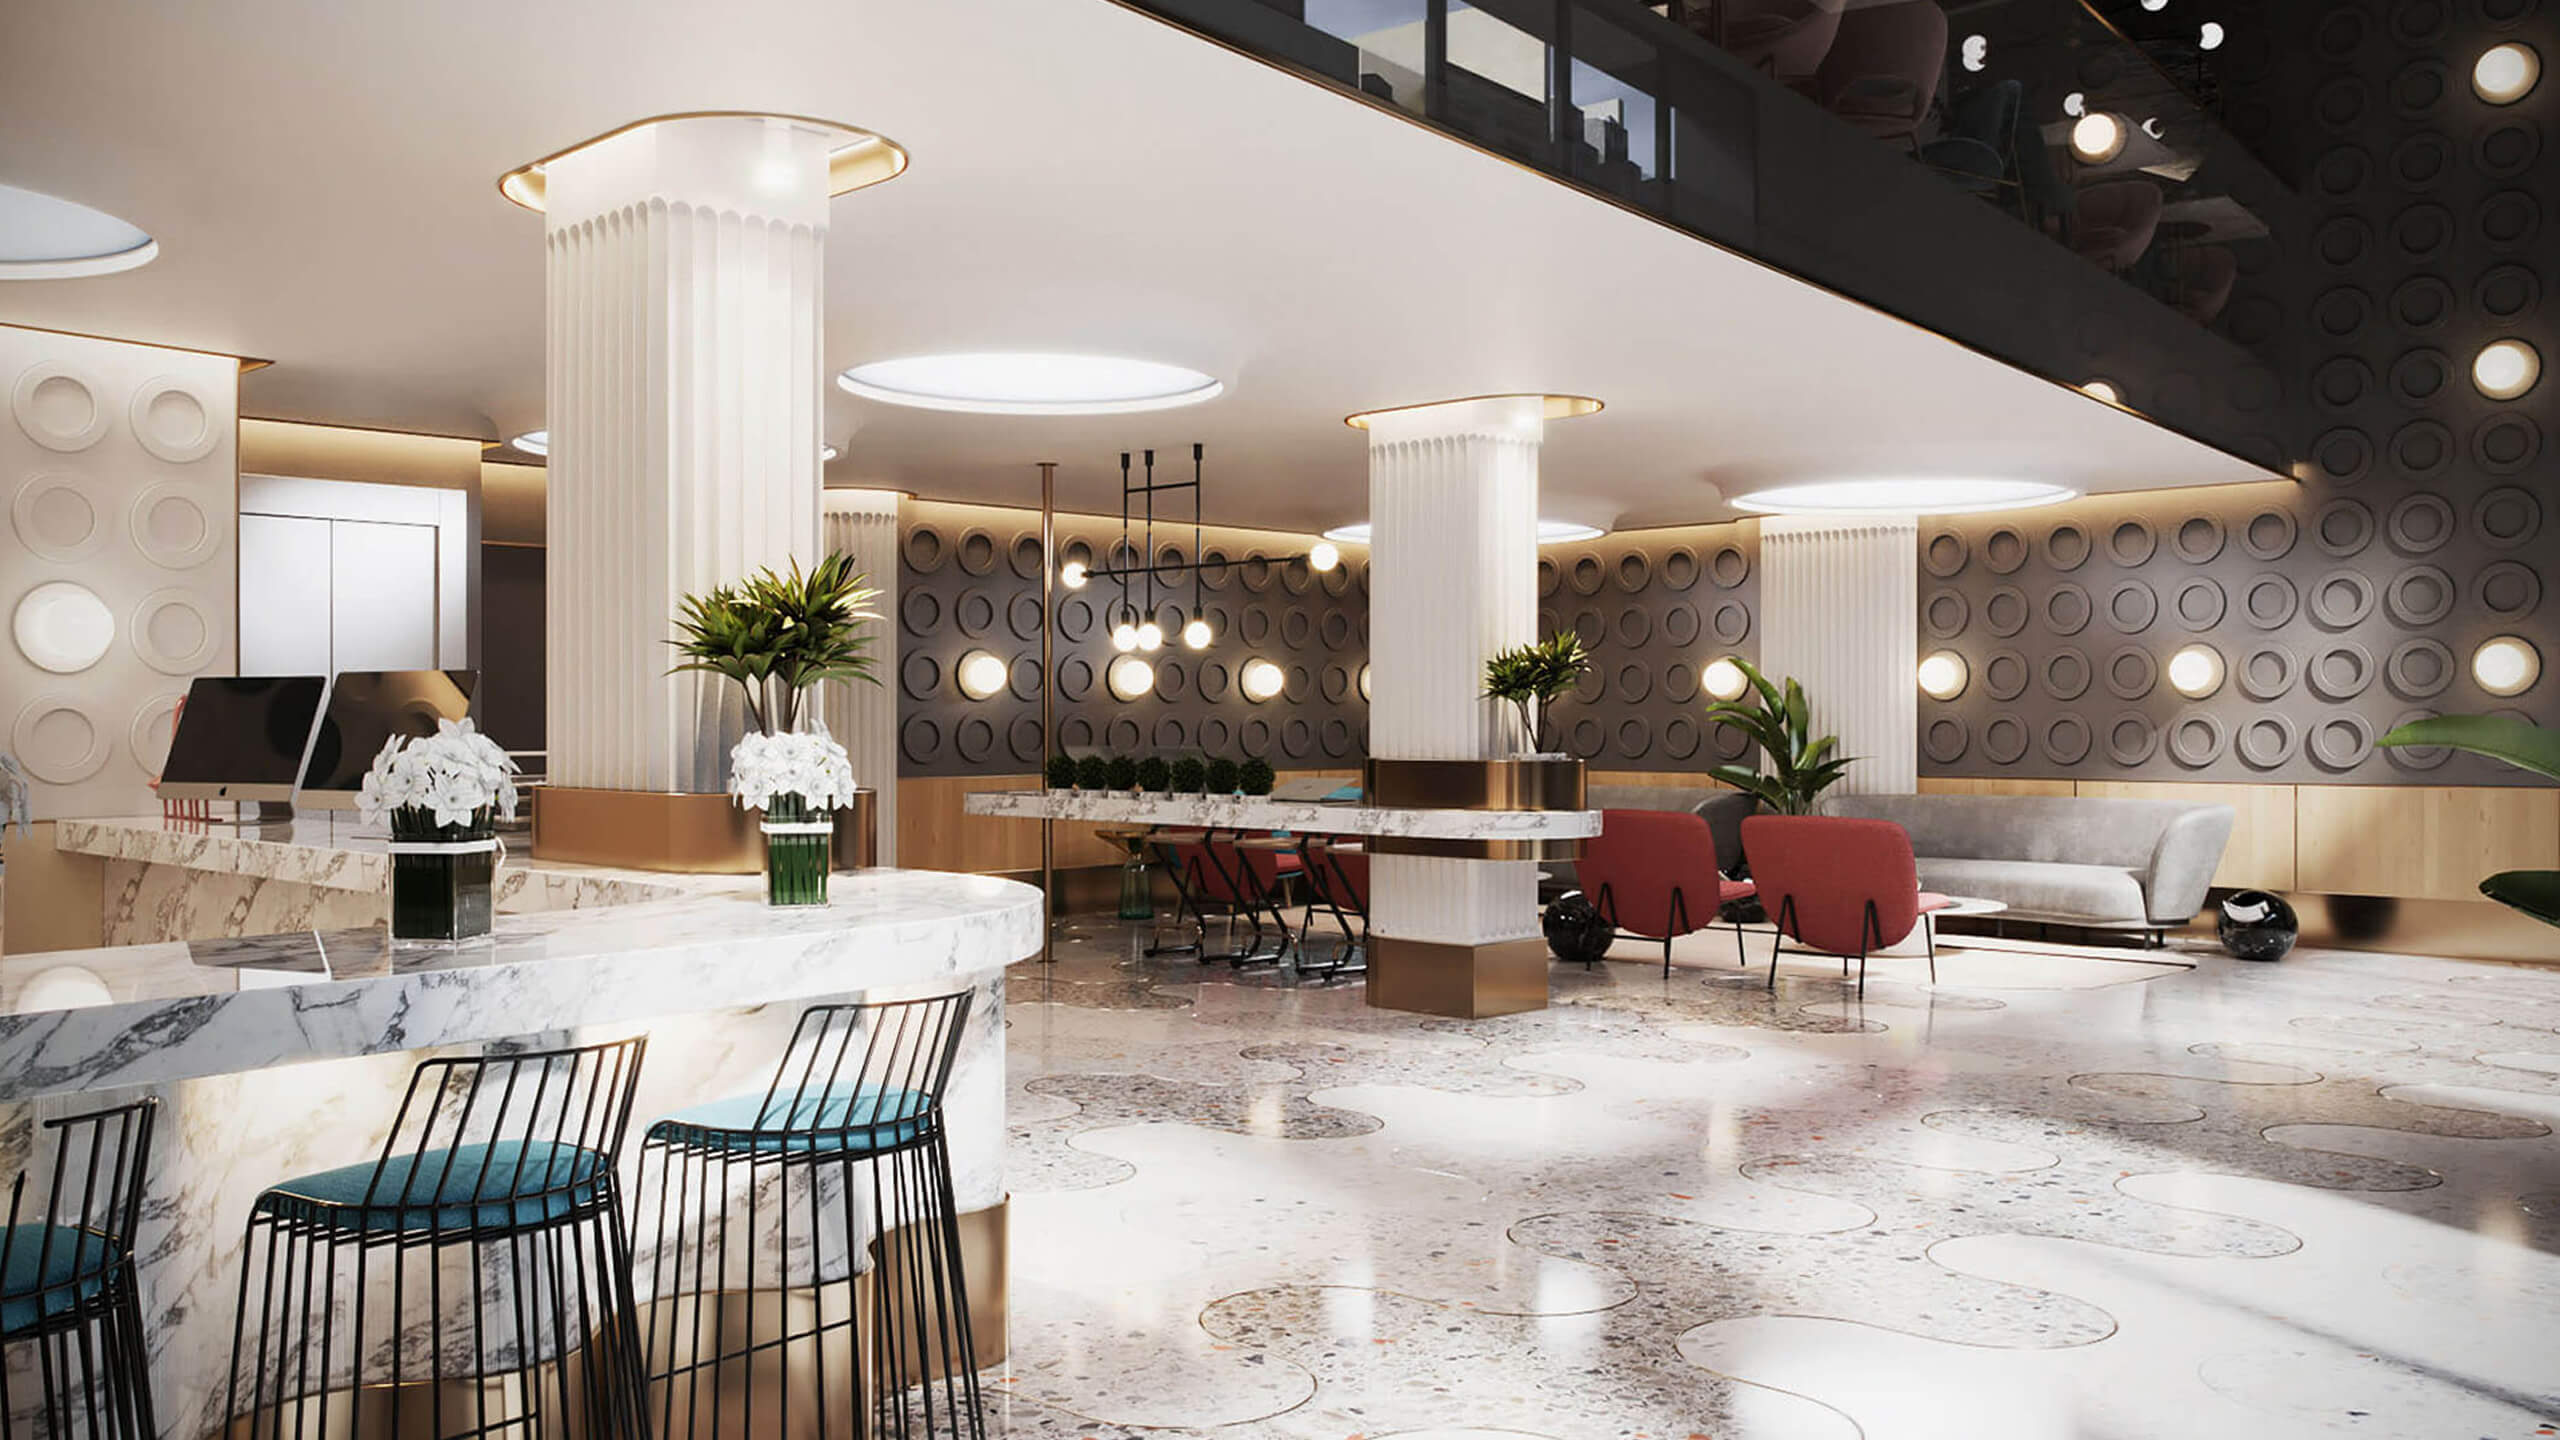 3D Visualization of Hotel Lobby